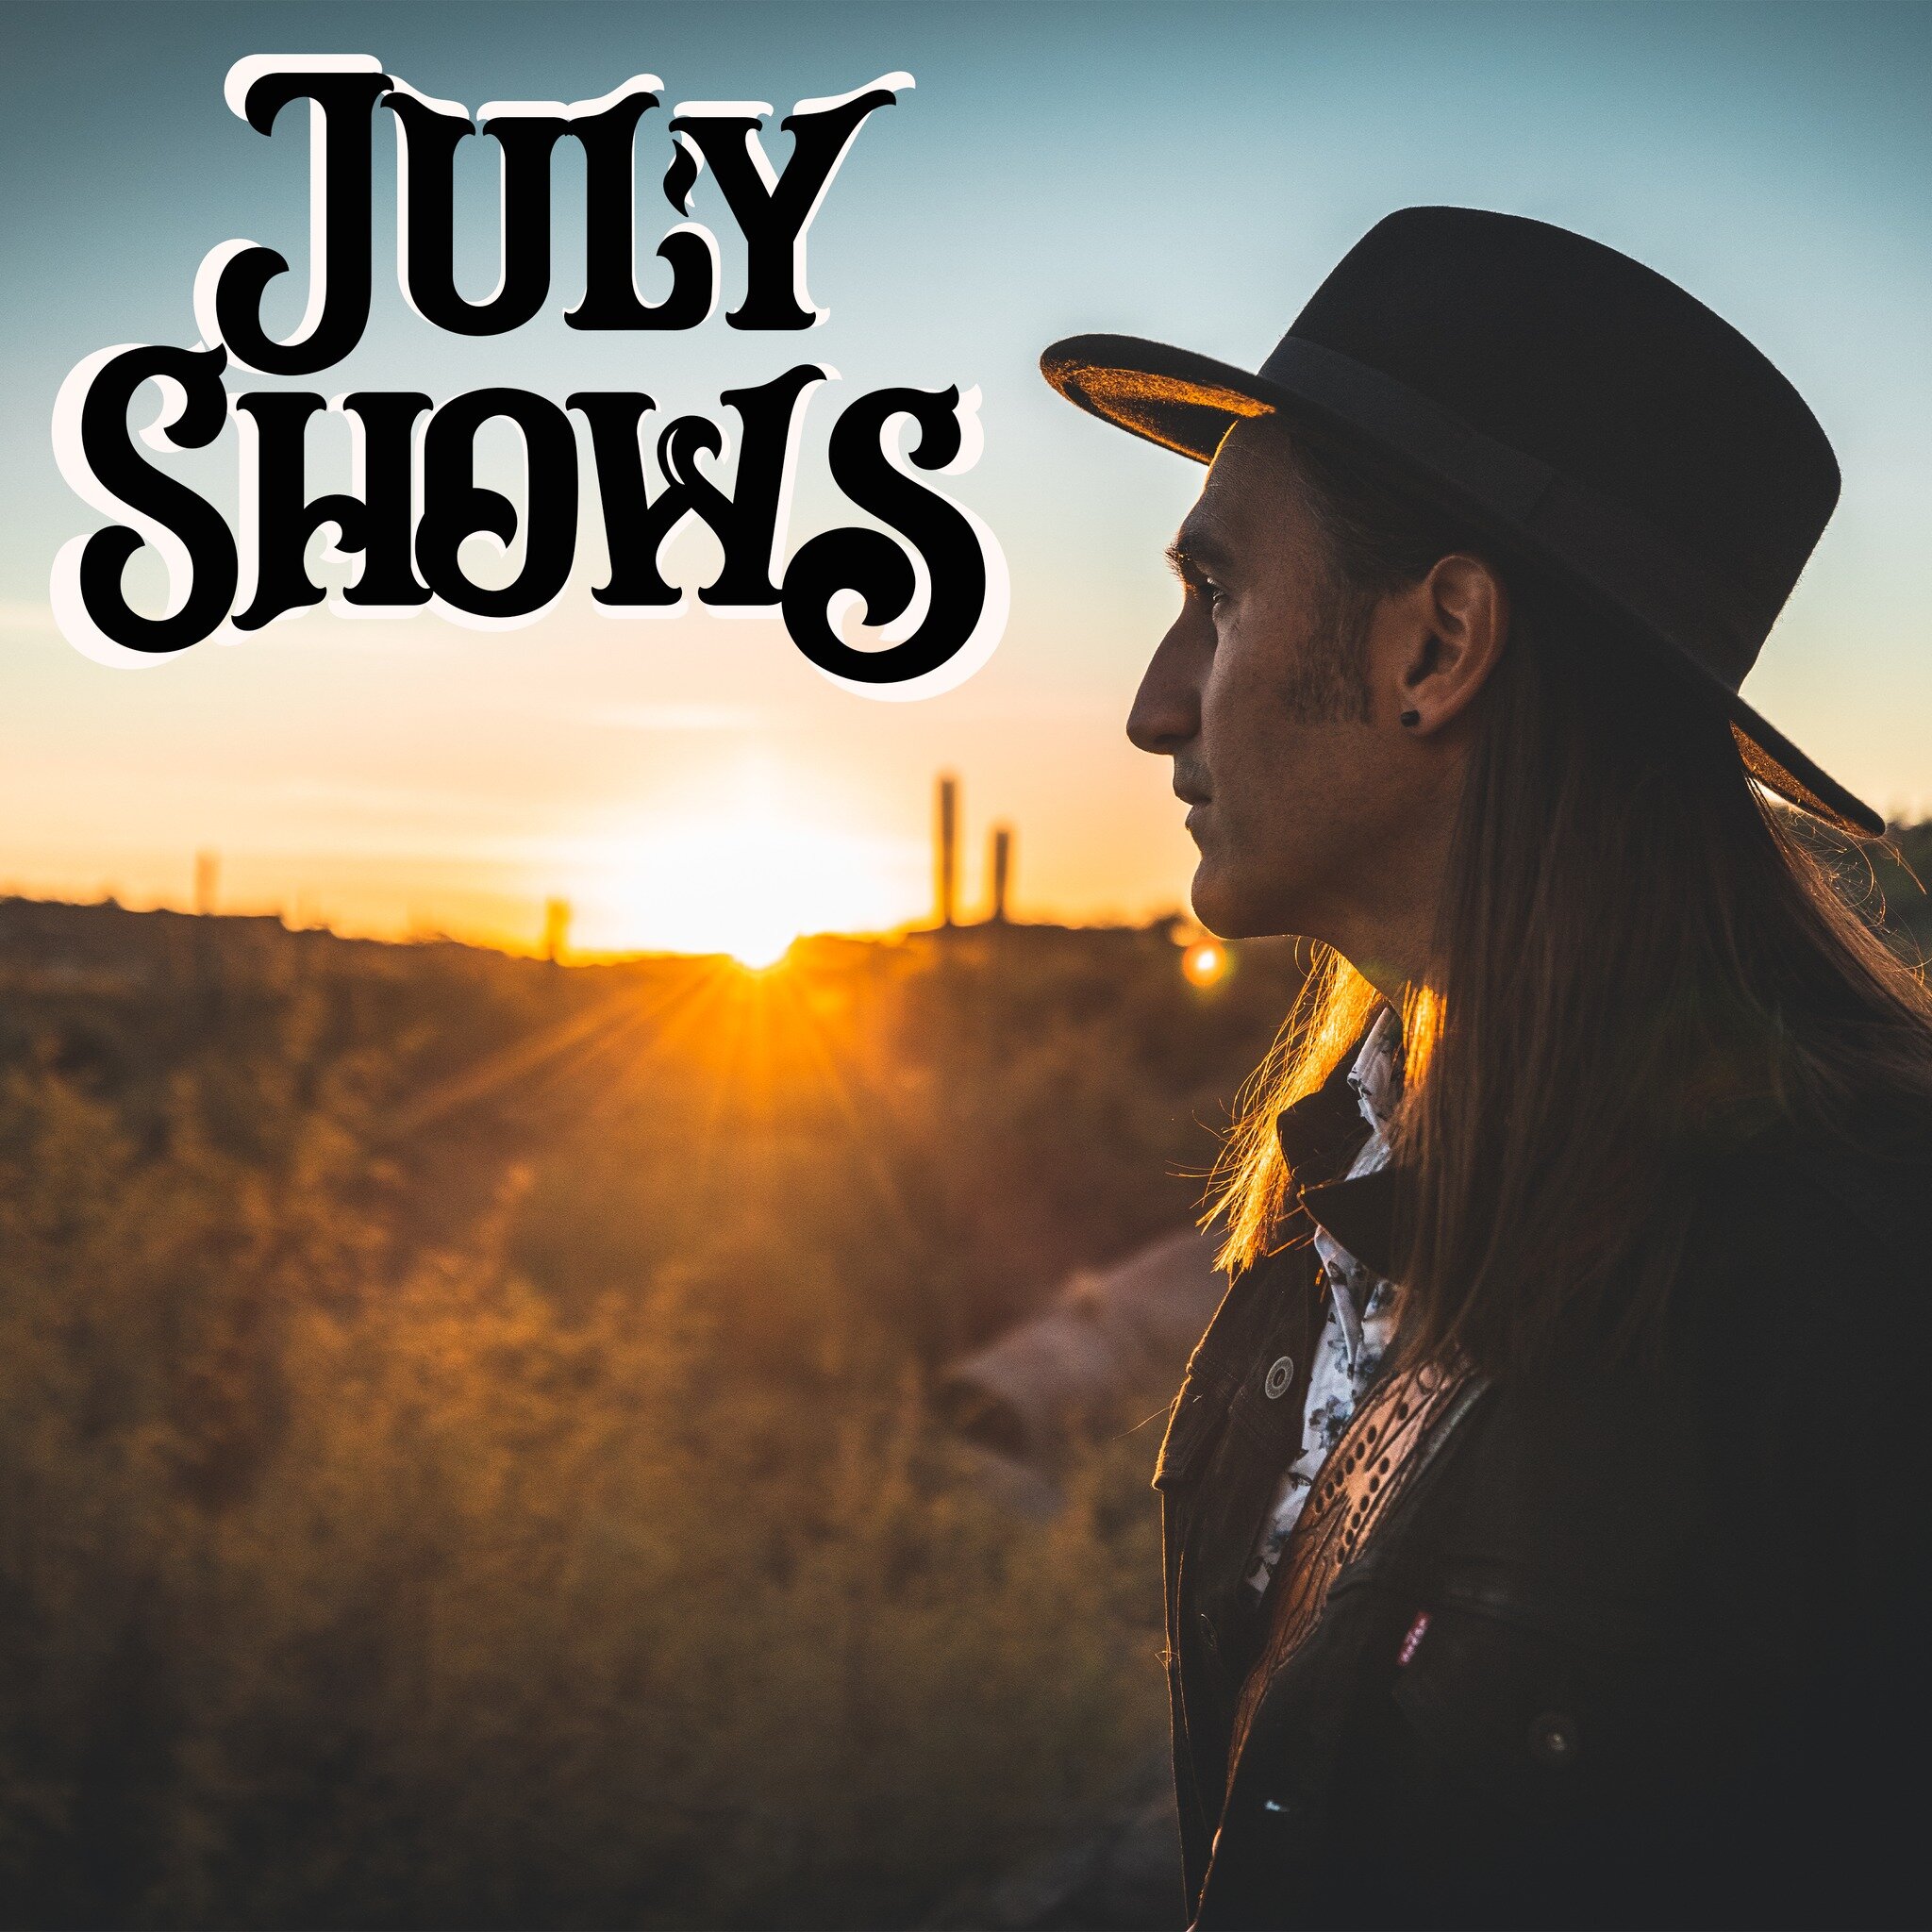 July has crept quietly into our possession. I'll be playing music in the summer desert sun. 🏜️ 🌵 Songs requests that include 10min solo sections are encouraged. 

Sat 1st - CB Live - 5-8
Sun 2nd - Vig (McD) - 11 - 2
Sun 2nd - Marriott (Desert Ridge